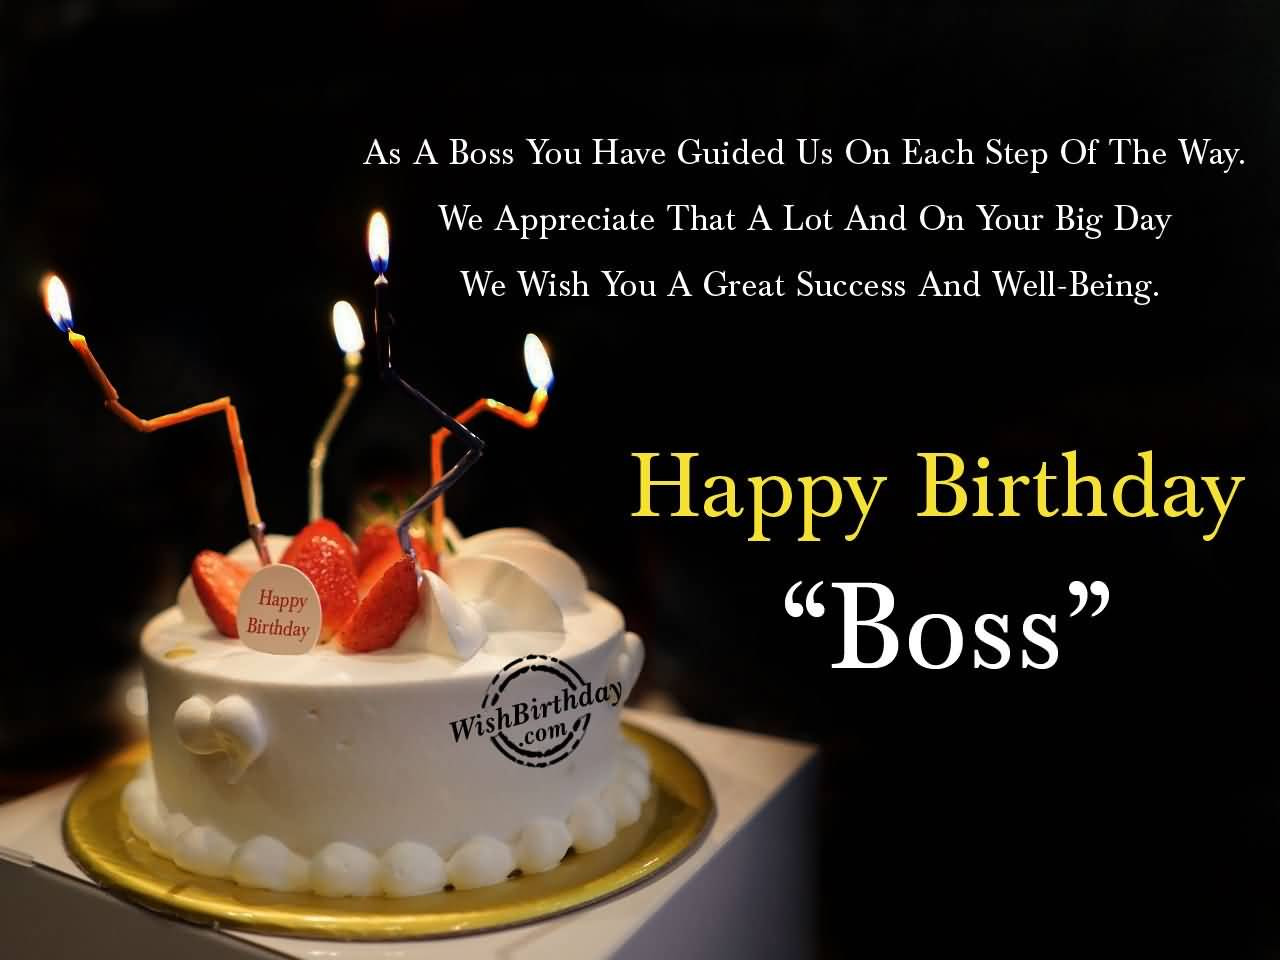 Happy Birthday Image Quotes
 32 Wonderful Boss Birthday Wishes Sayings Picture